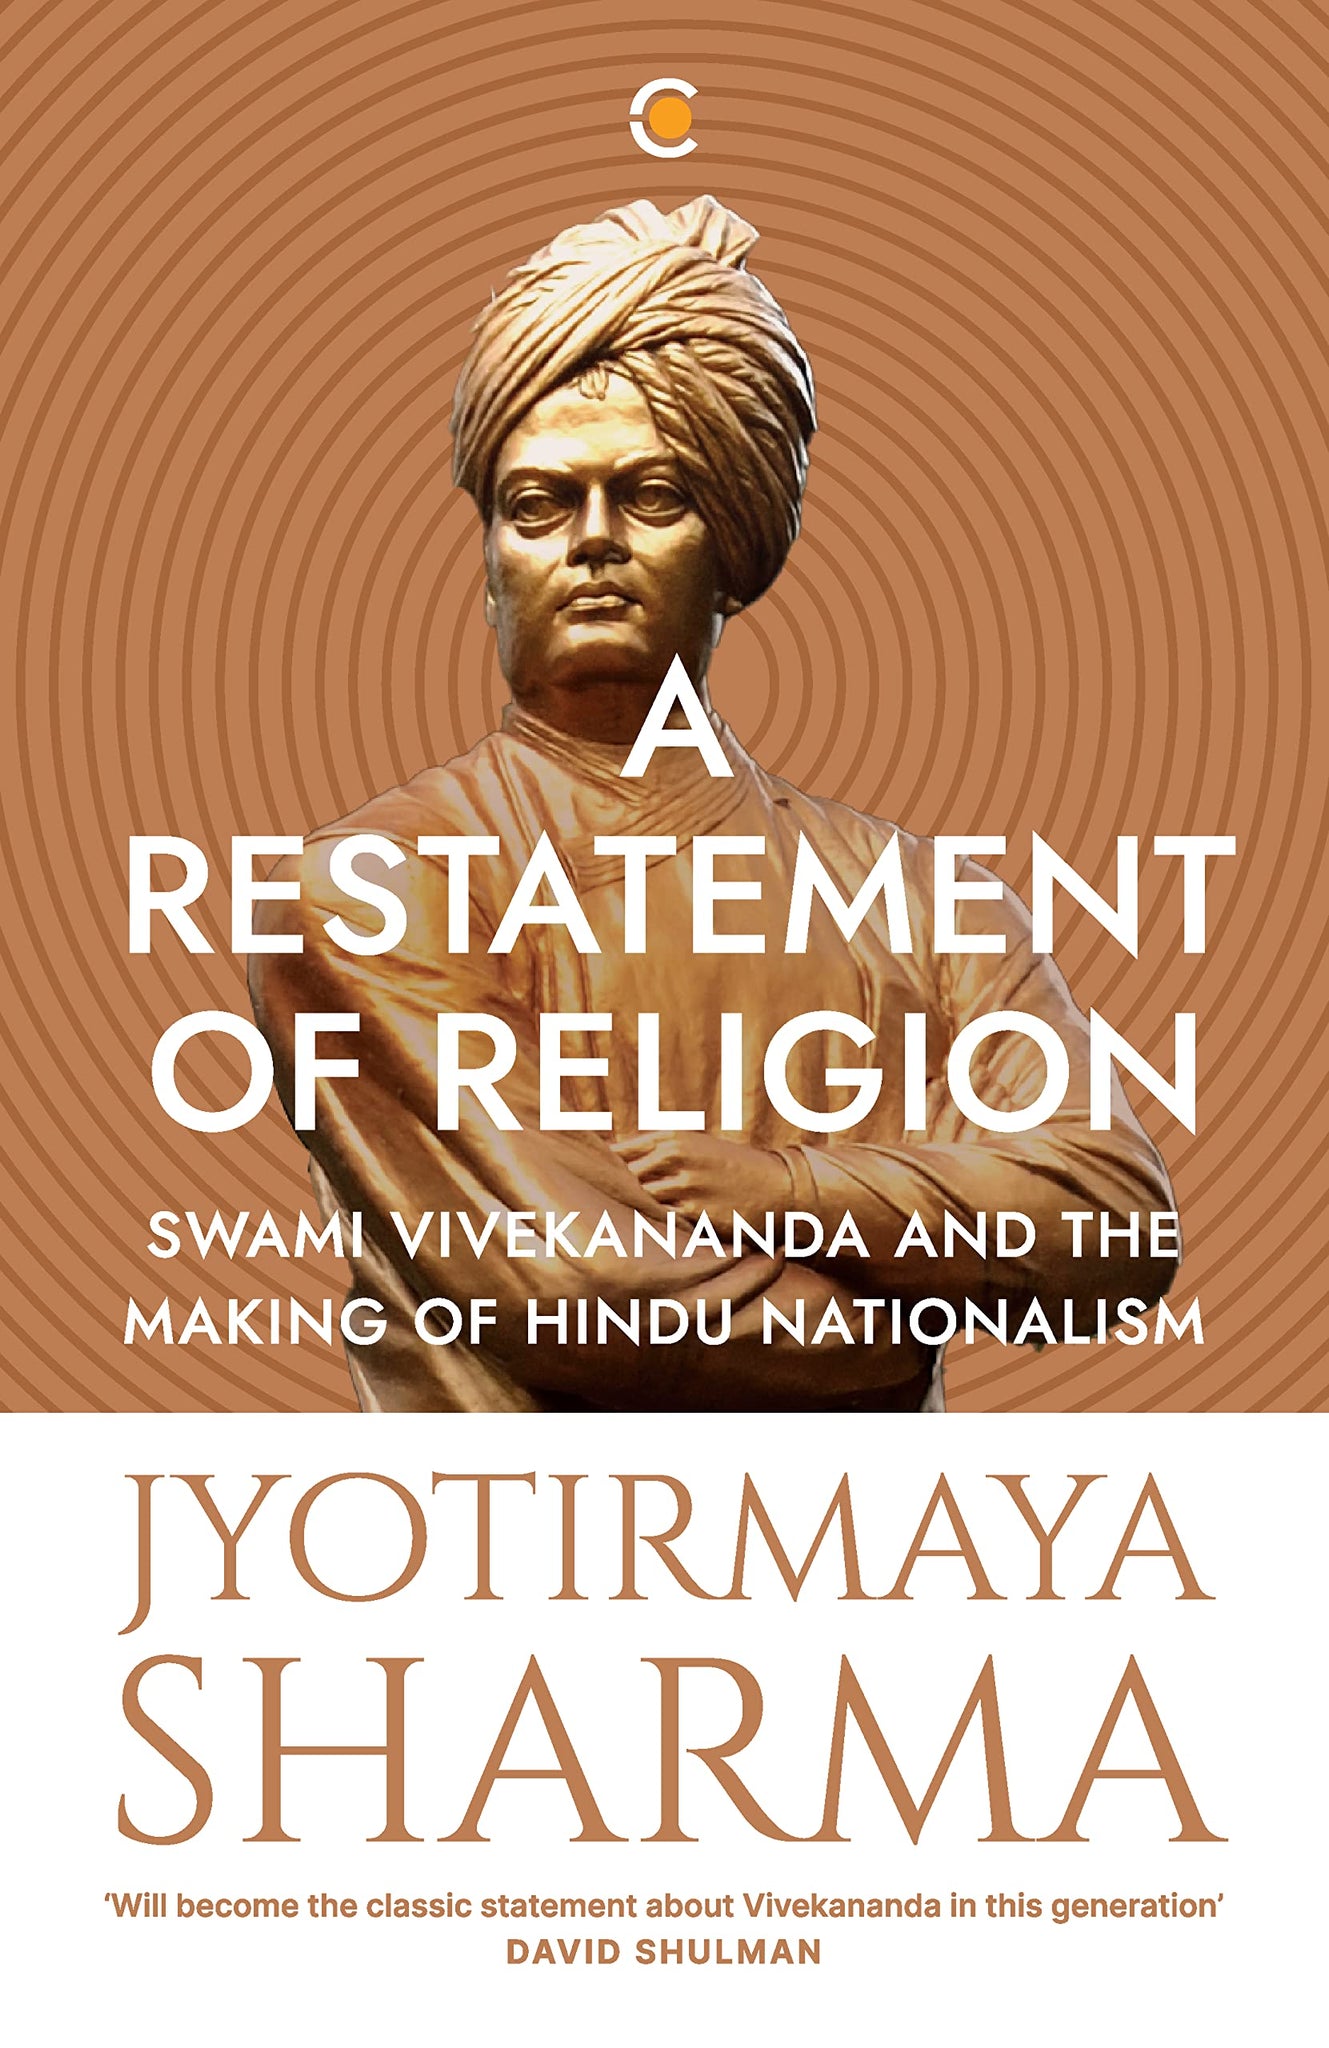 A Restatement of Religion : Swami Vivekananda and the making of Hindu Nationalism